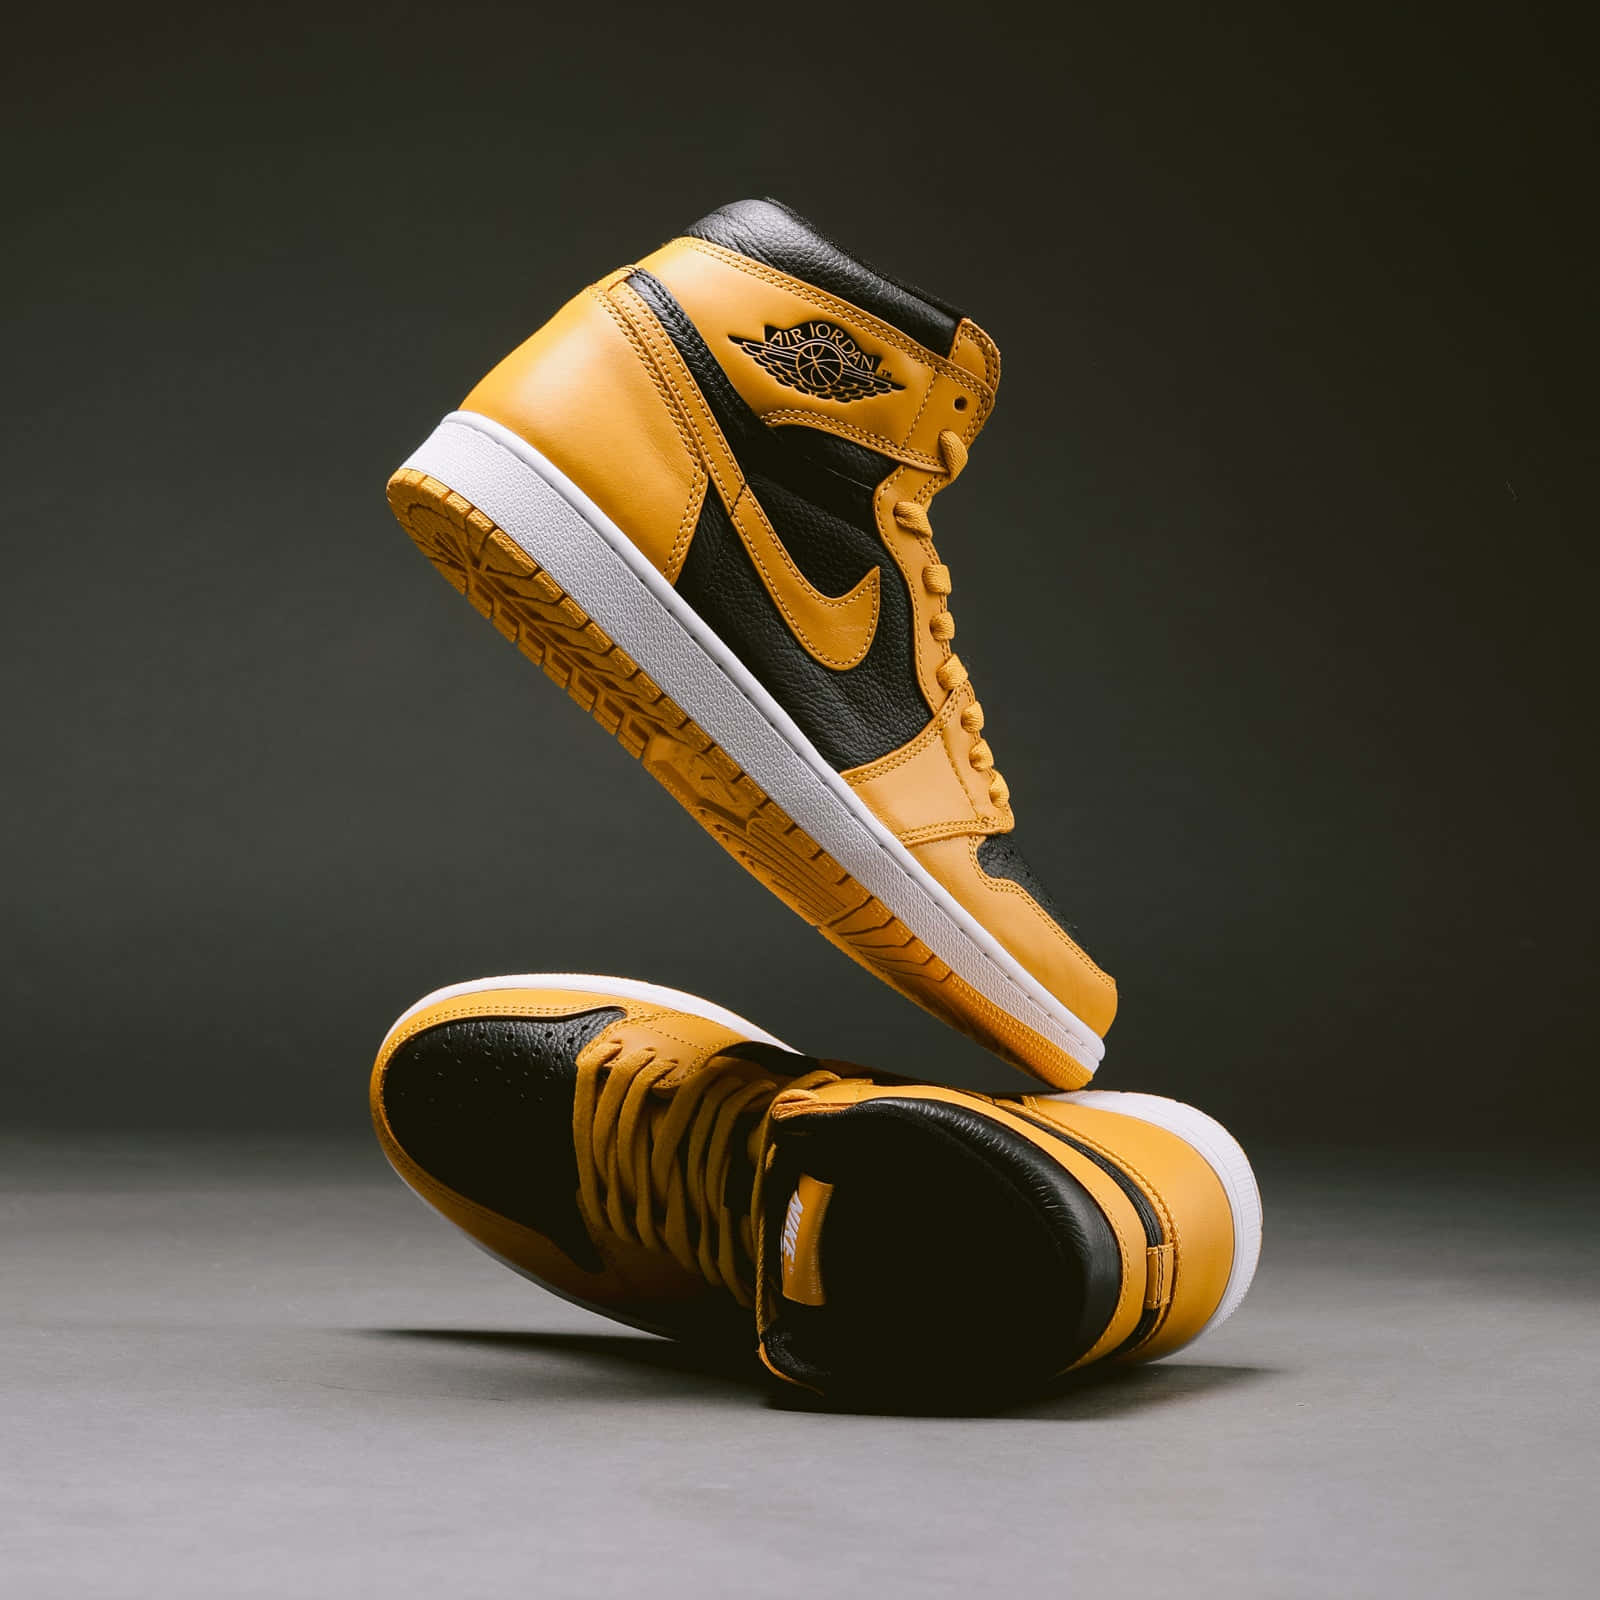 Look stylish and bold in the classic Yellow Jordan sneaker. Wallpaper